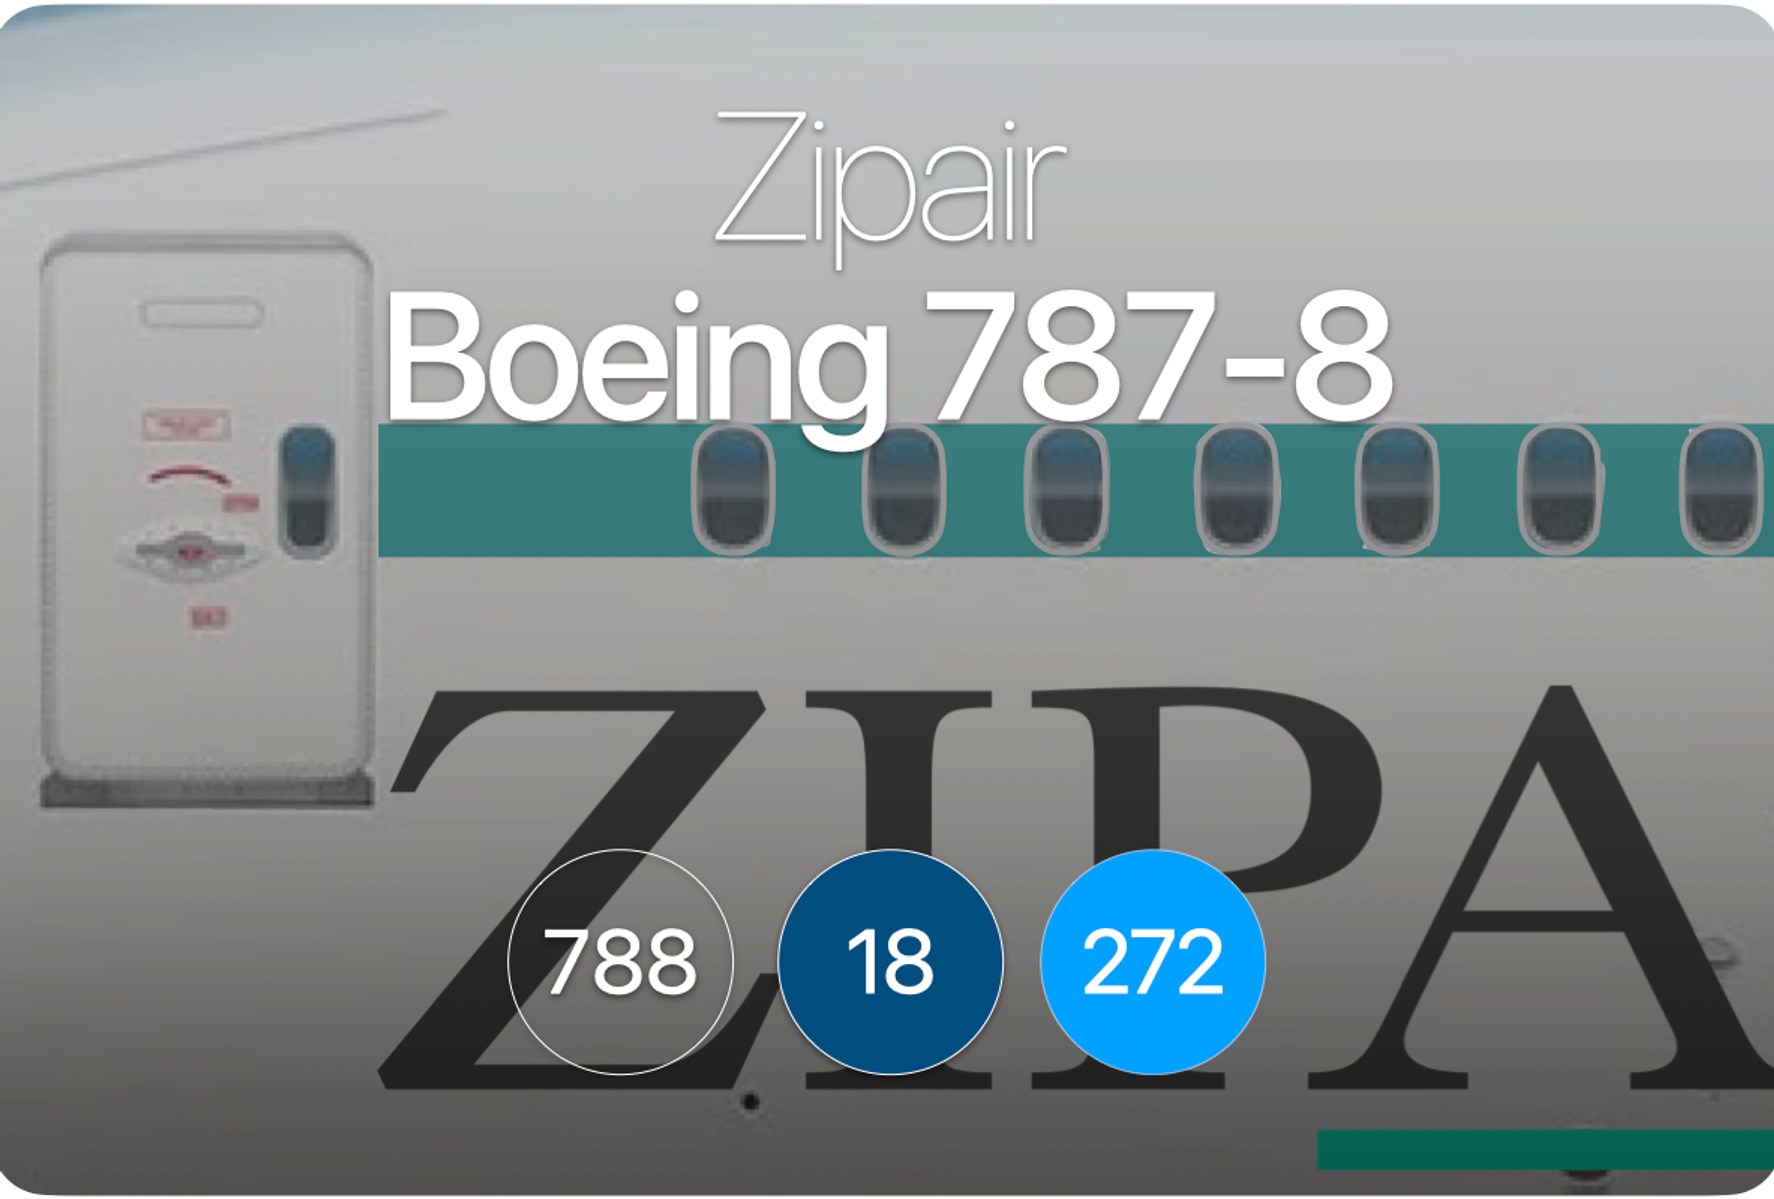 Zg Boeing 787 8 Aerolopa Detailed Aircraft Seat Plans